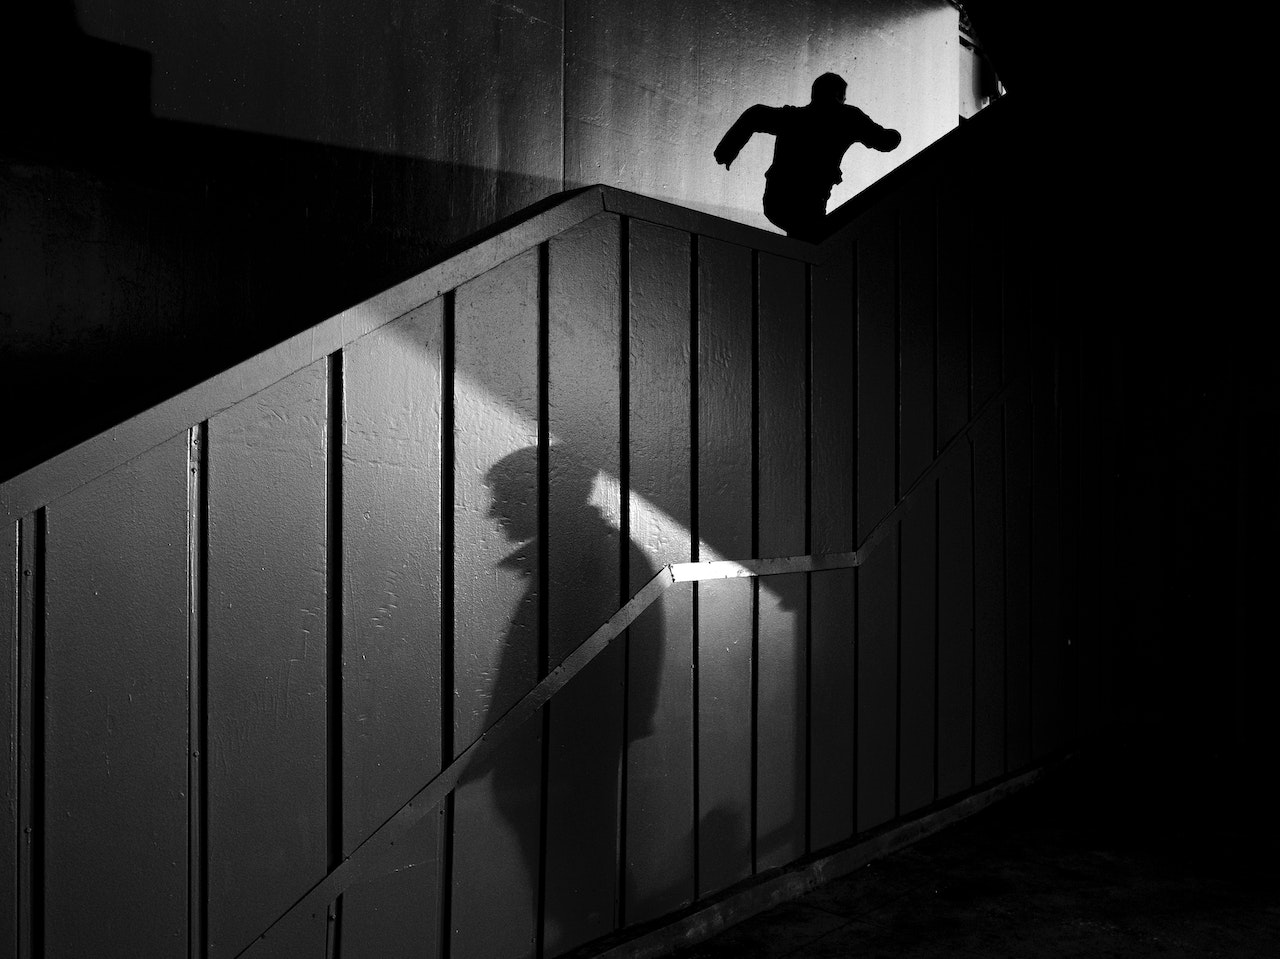 Shadow of a Man with another Running up Staircase